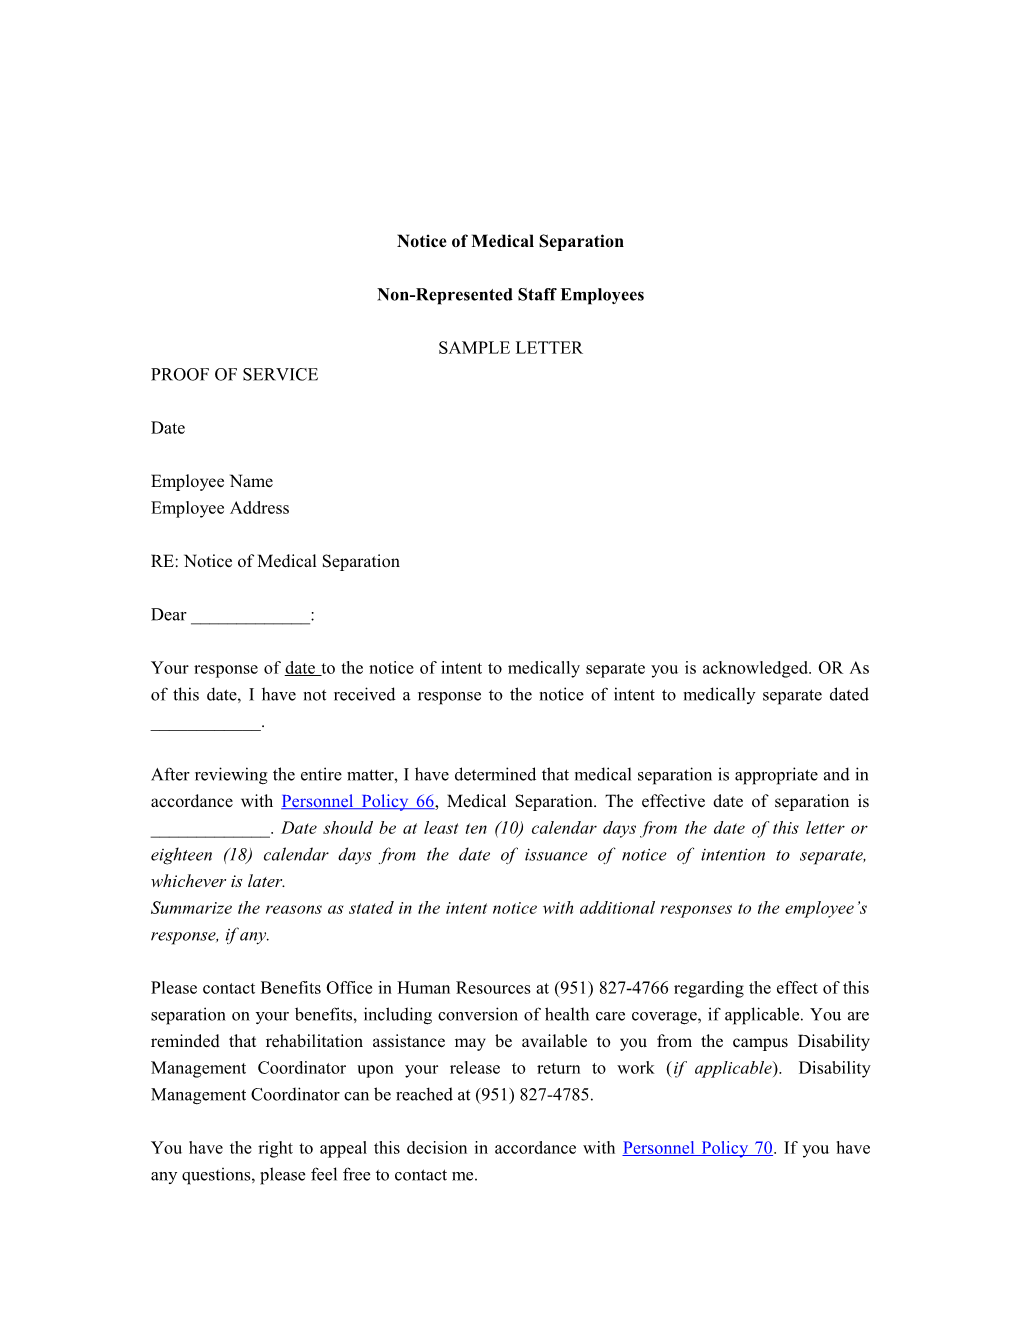 Notice of Intent to Medical Separation